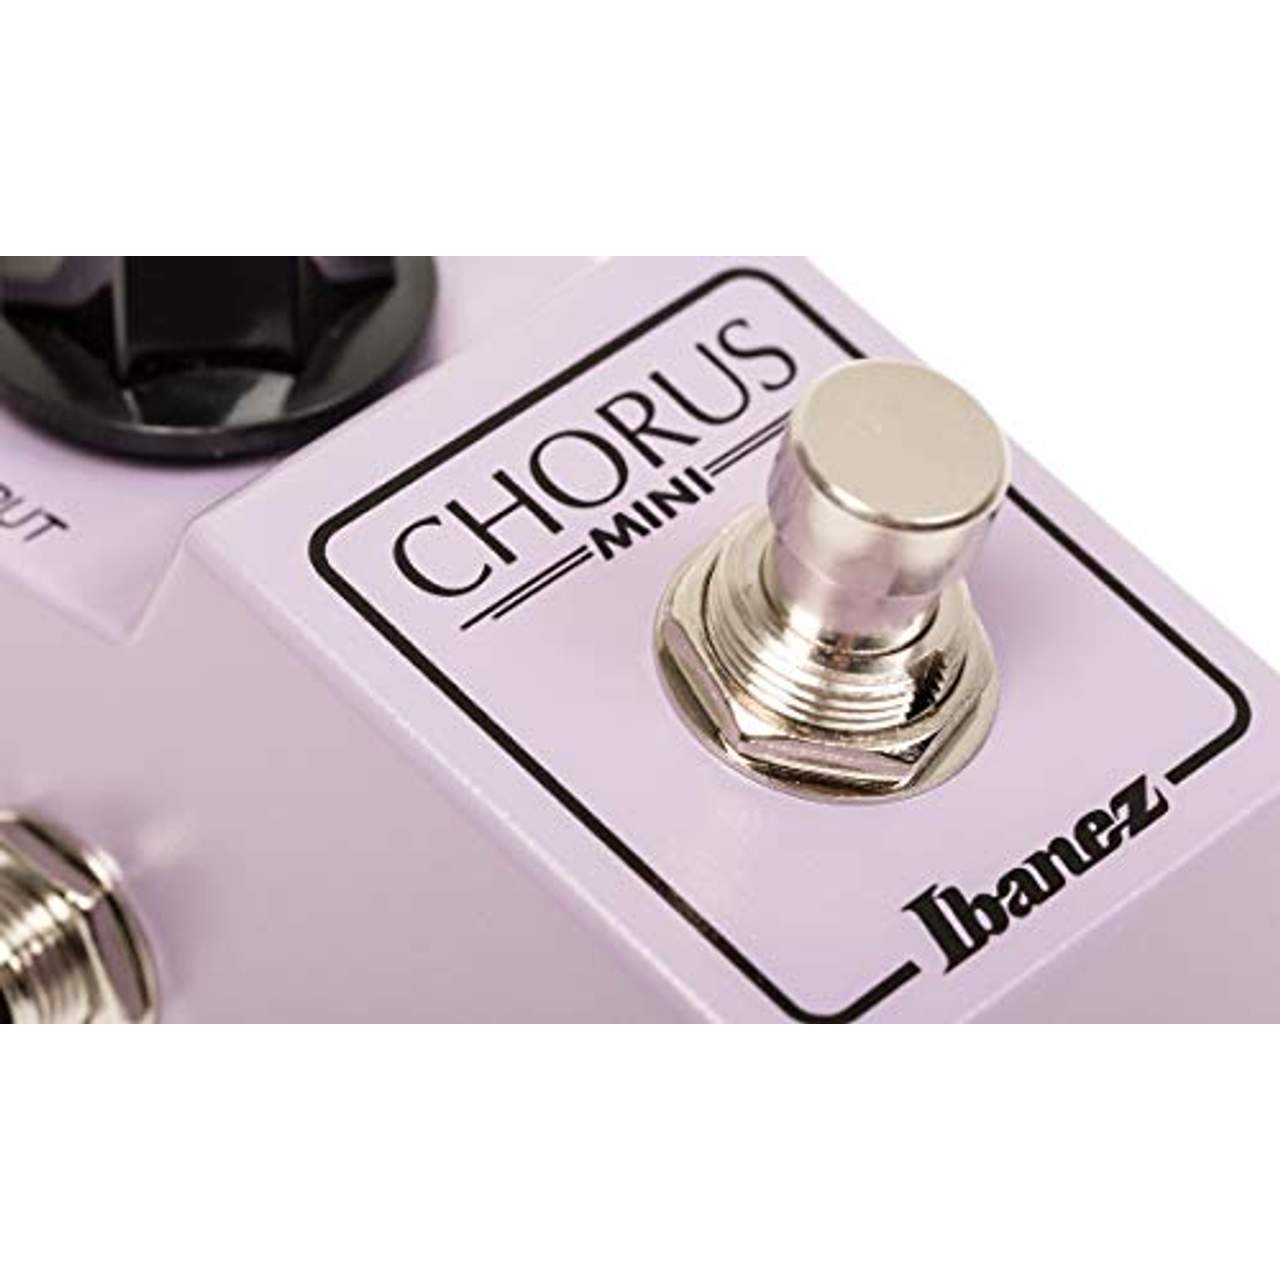 Ibanez Stereo Chorus Mini Effect Device Made in Japan